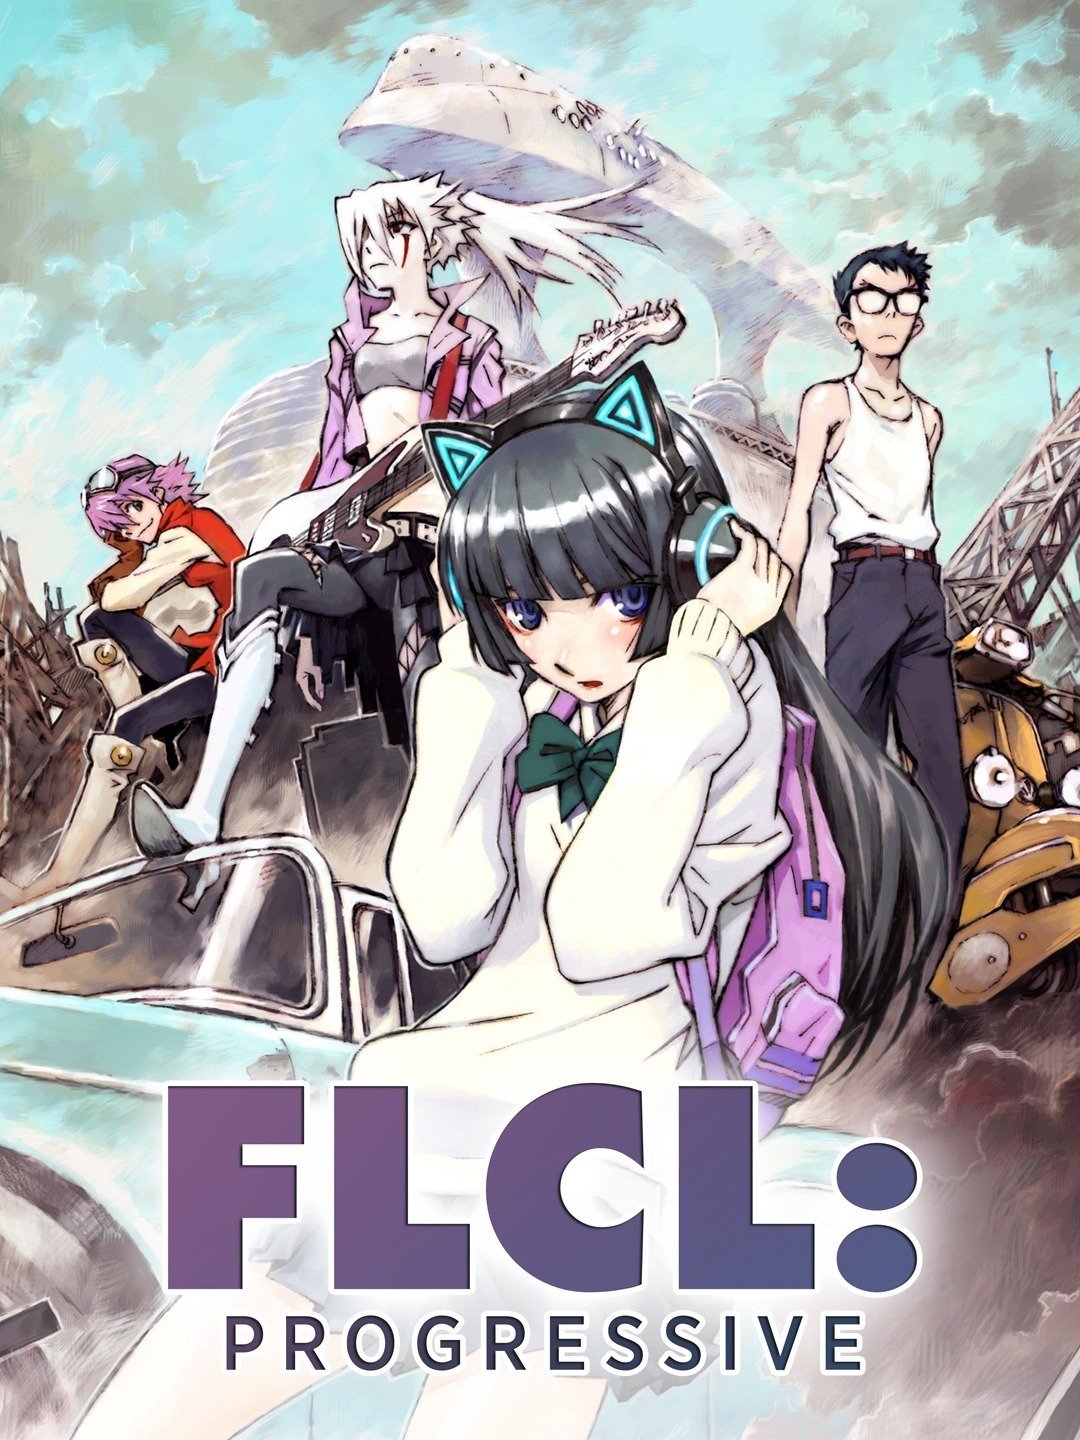 FLCL Shares First Details for Its Next Two Seasons